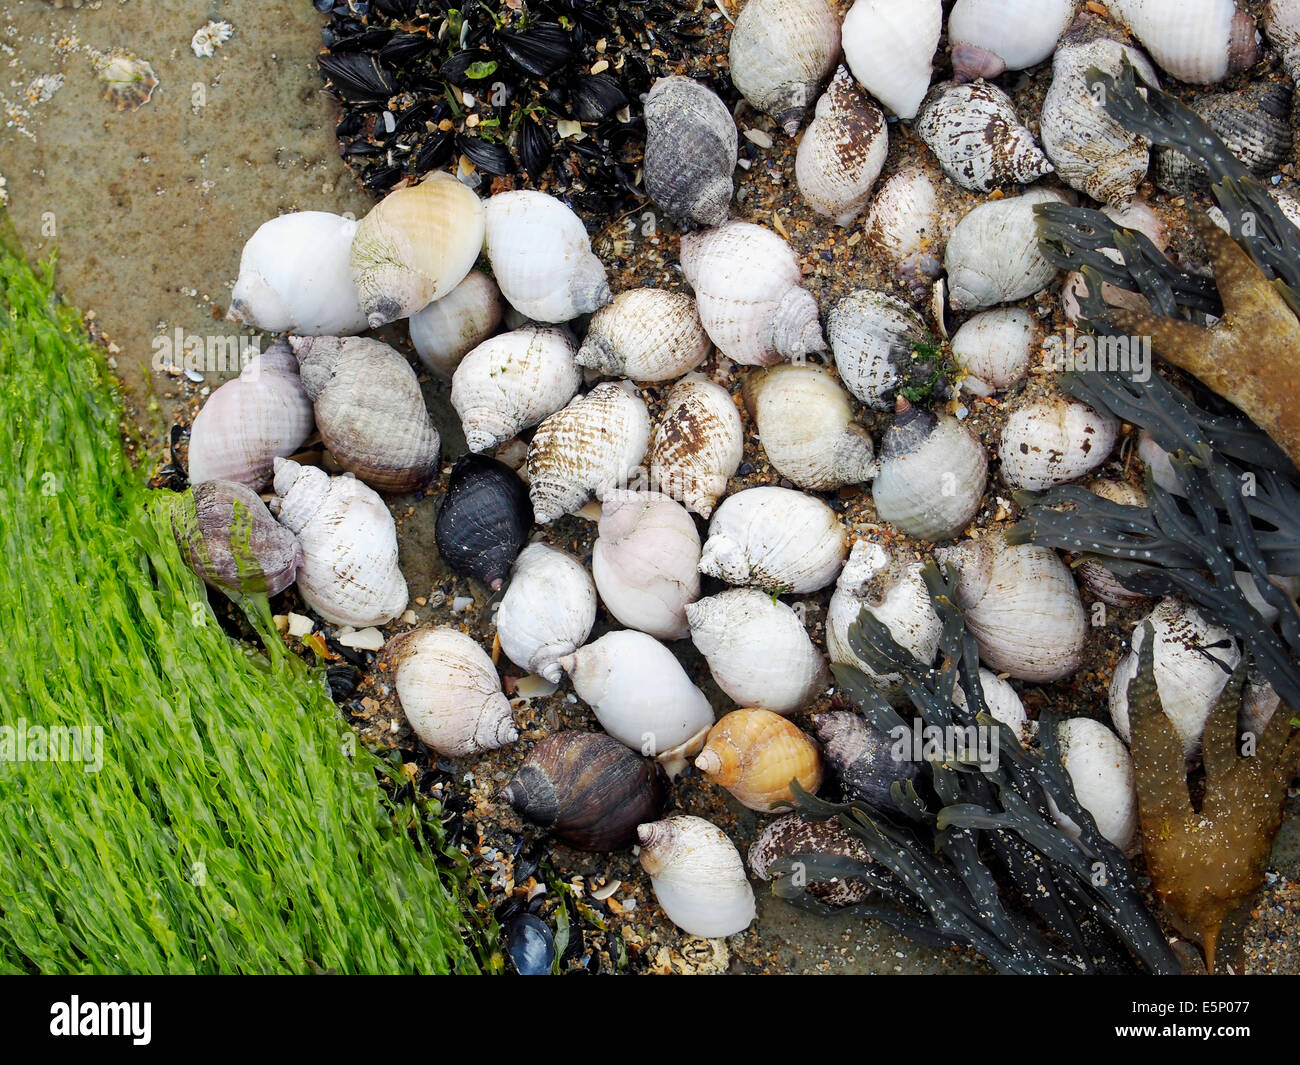 Whelks and seaweeds growing on rocks in the intertidal zone of a rocky section of beach in western Ireland Stock Photo